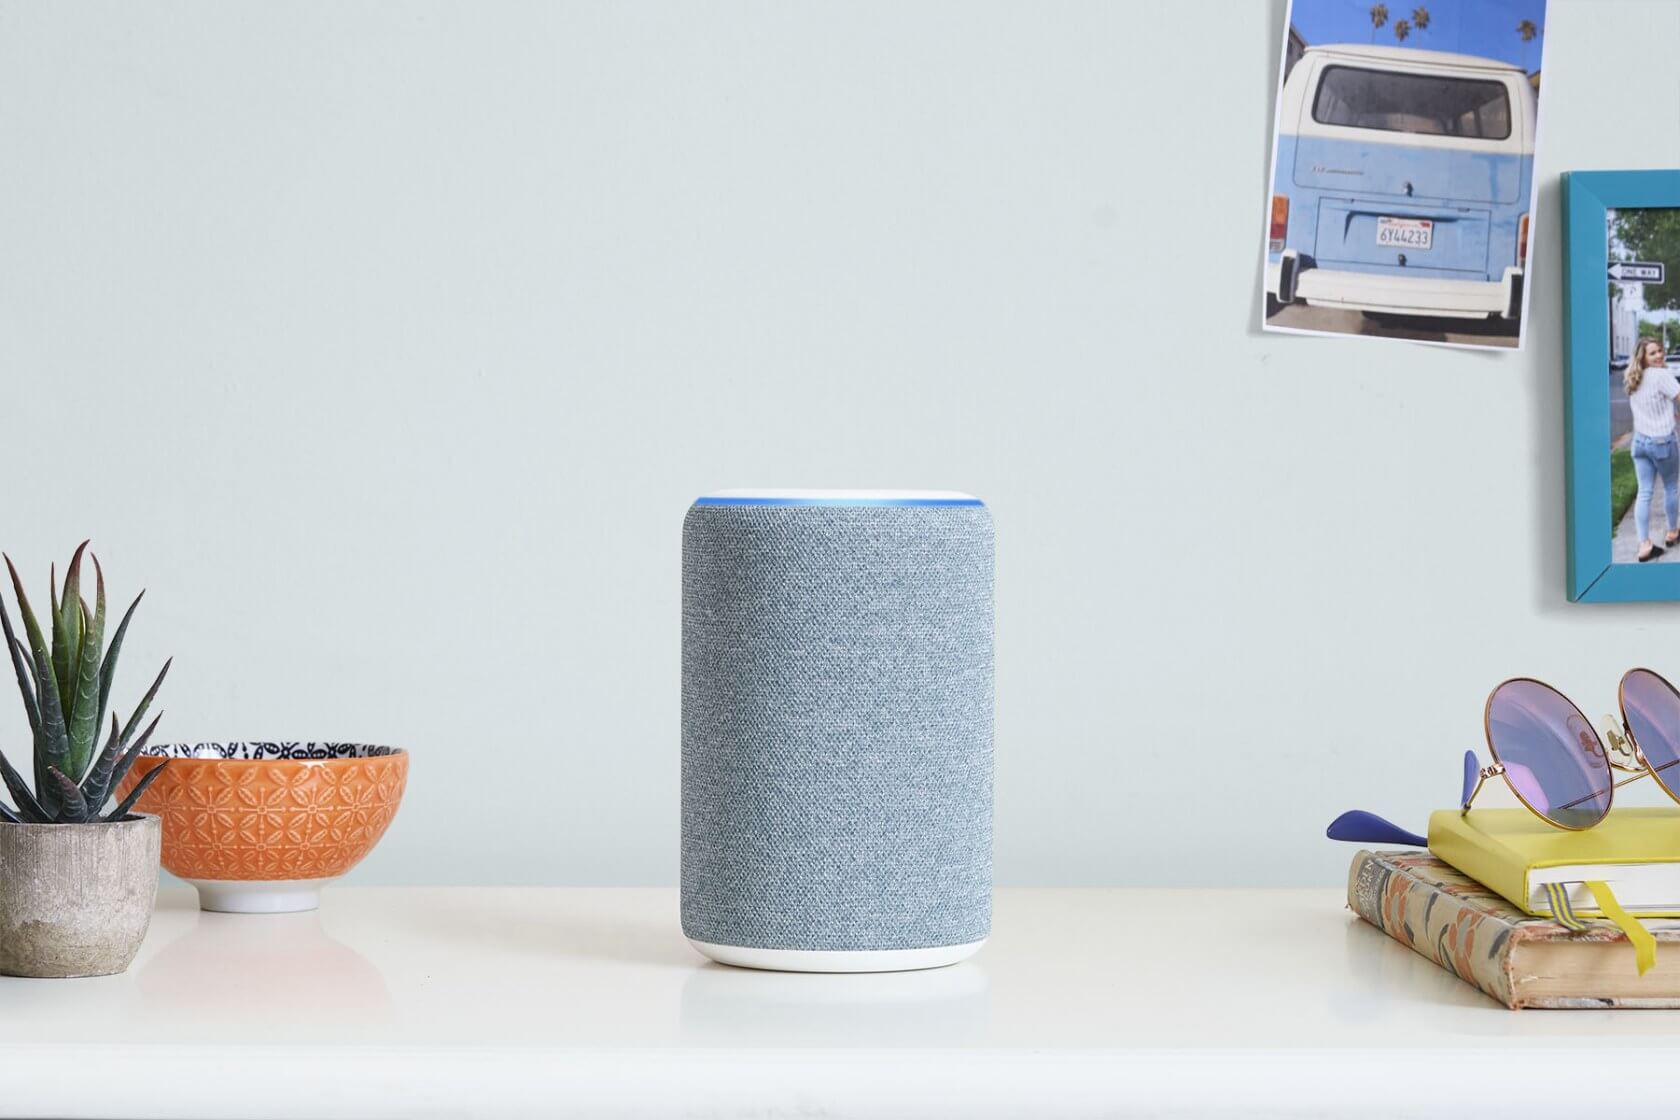 Amazon's 3rd-gen Echo features a new design and better audio